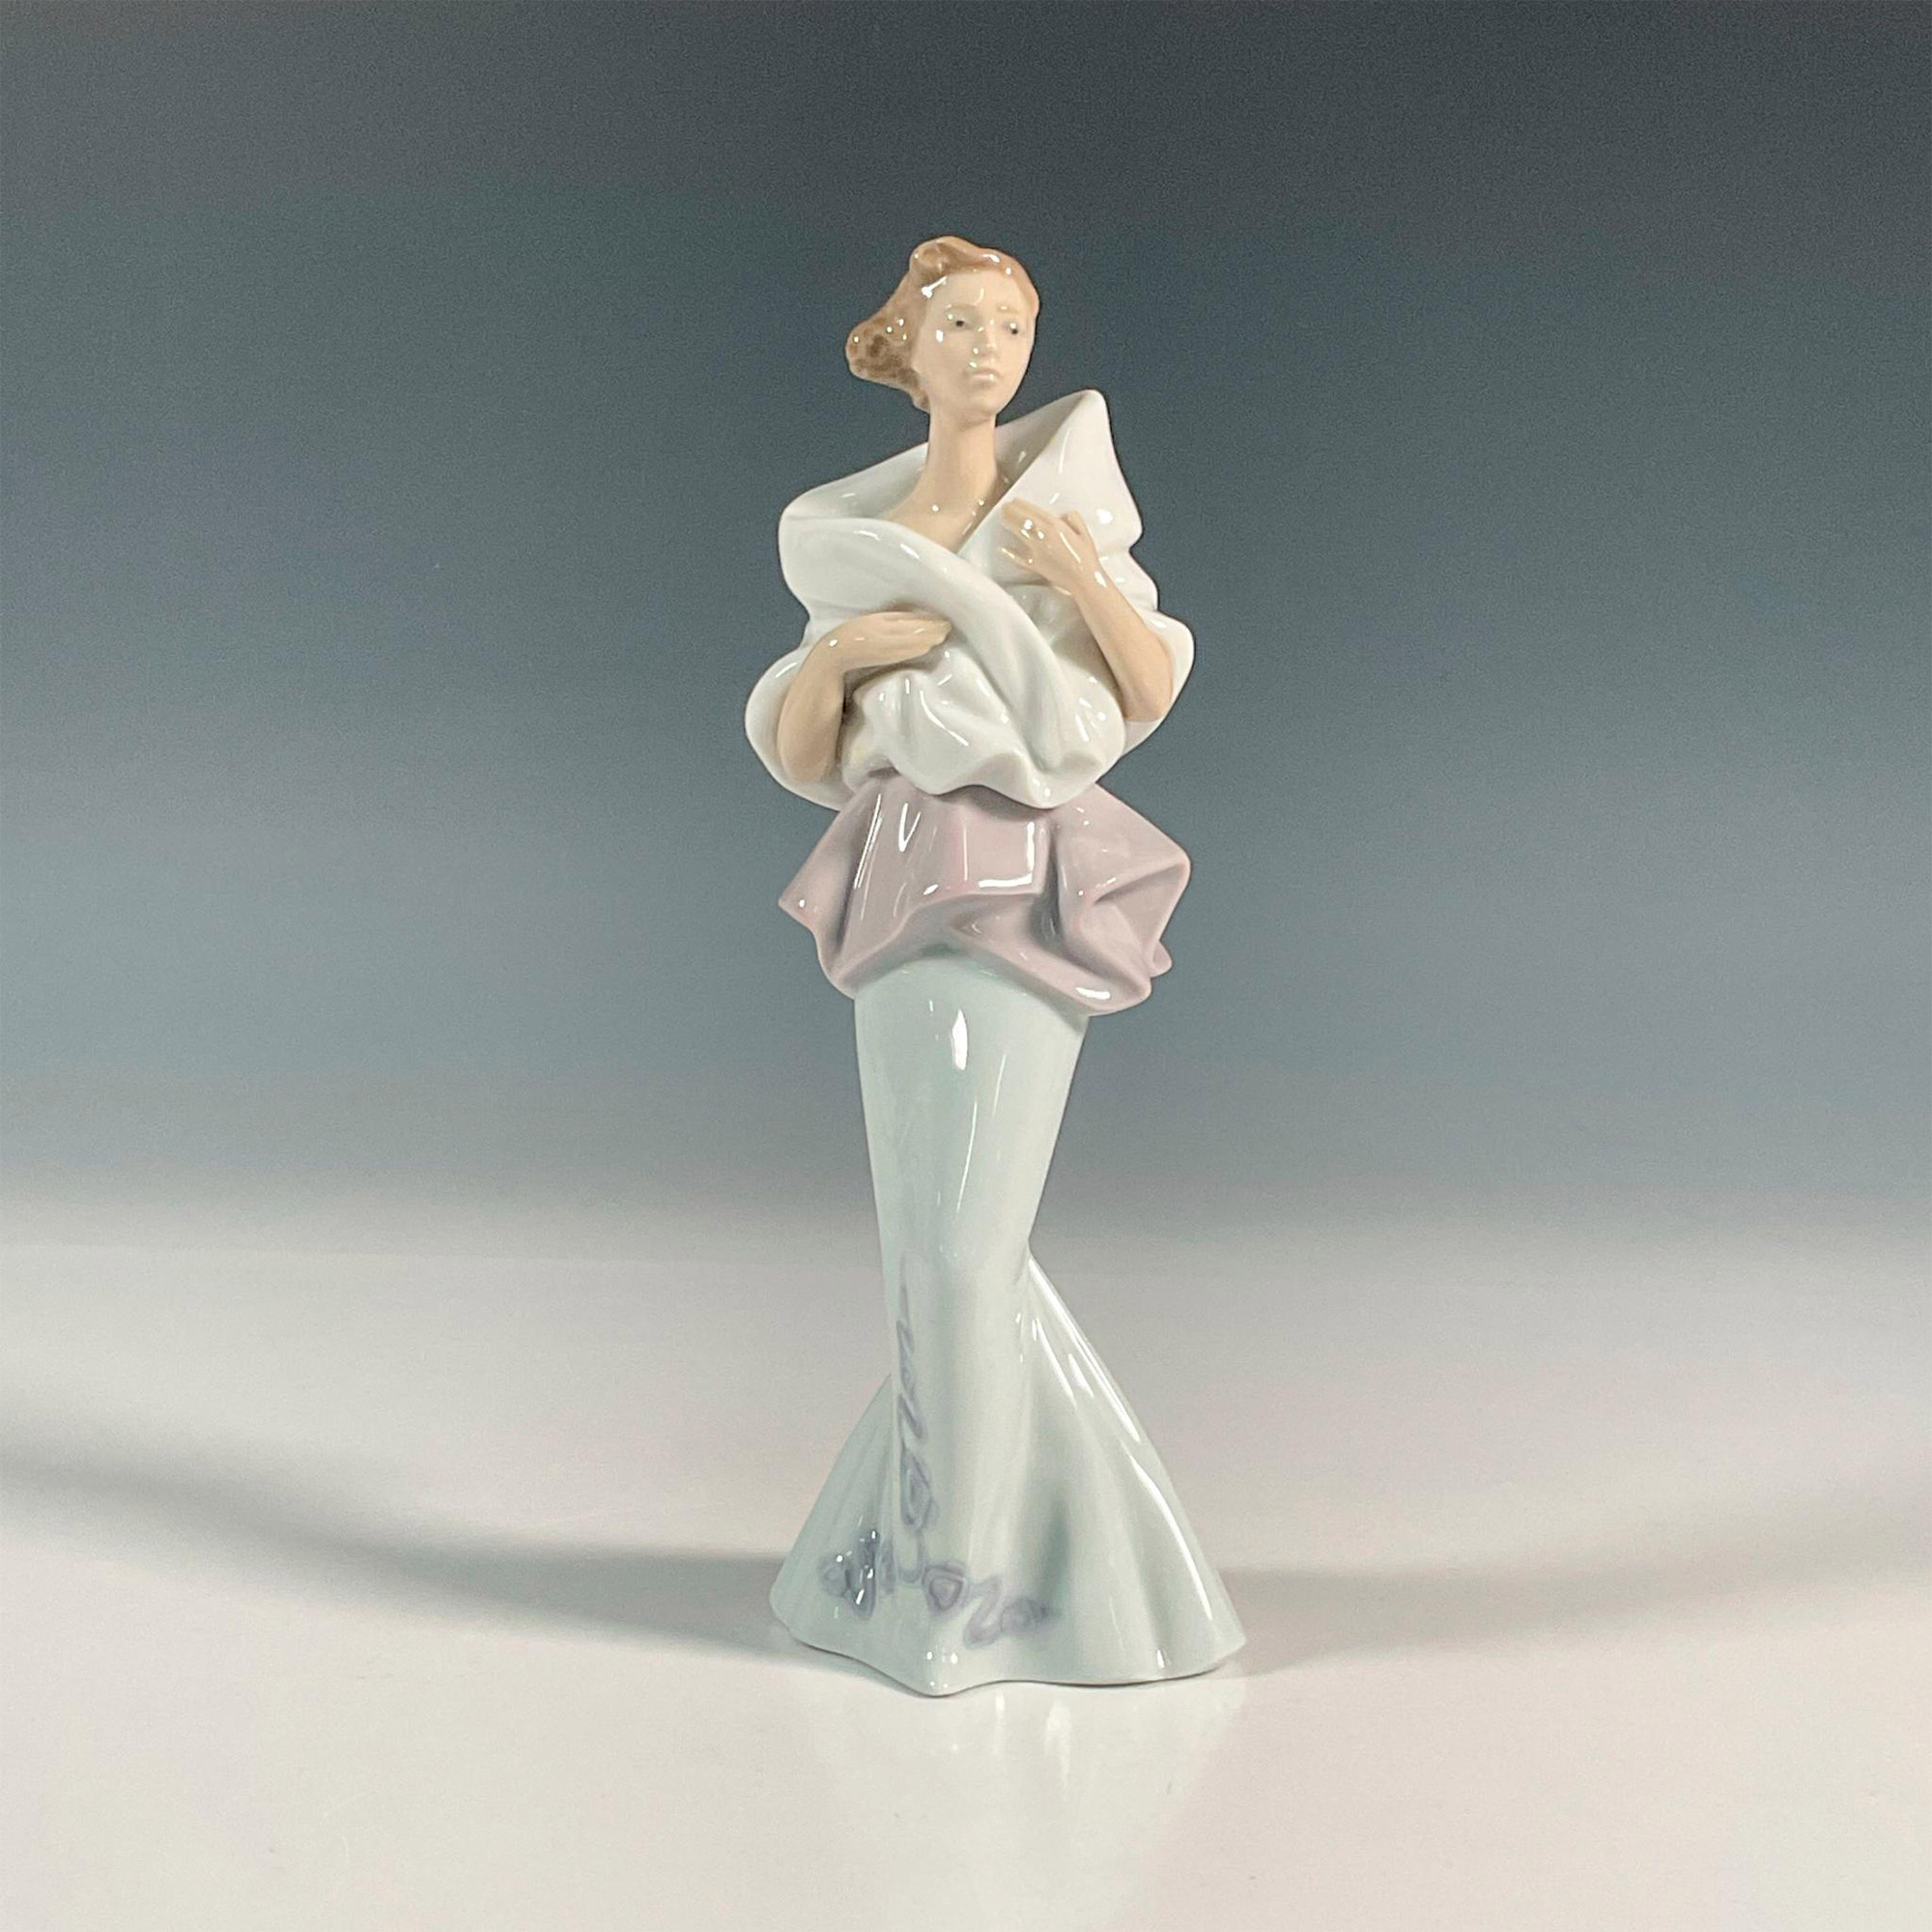 A Night Out 1006594 - Lladro Porcelain Figurine - Image 3 of 5